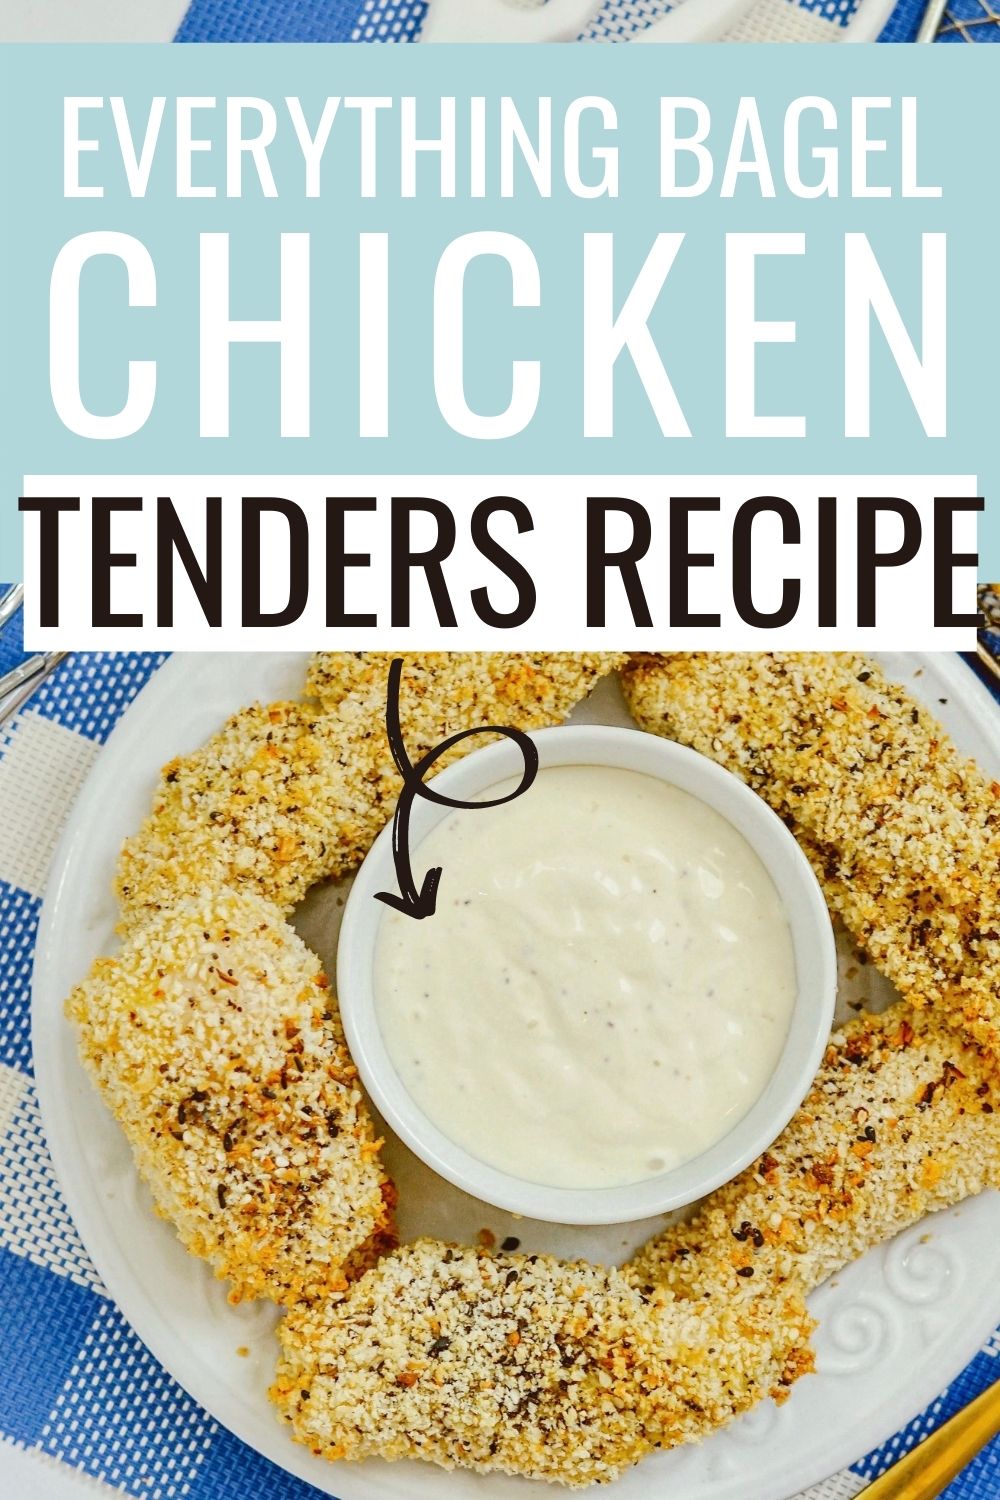 Pin showing the finished air fryer everything bagel chicken tenders recipe.